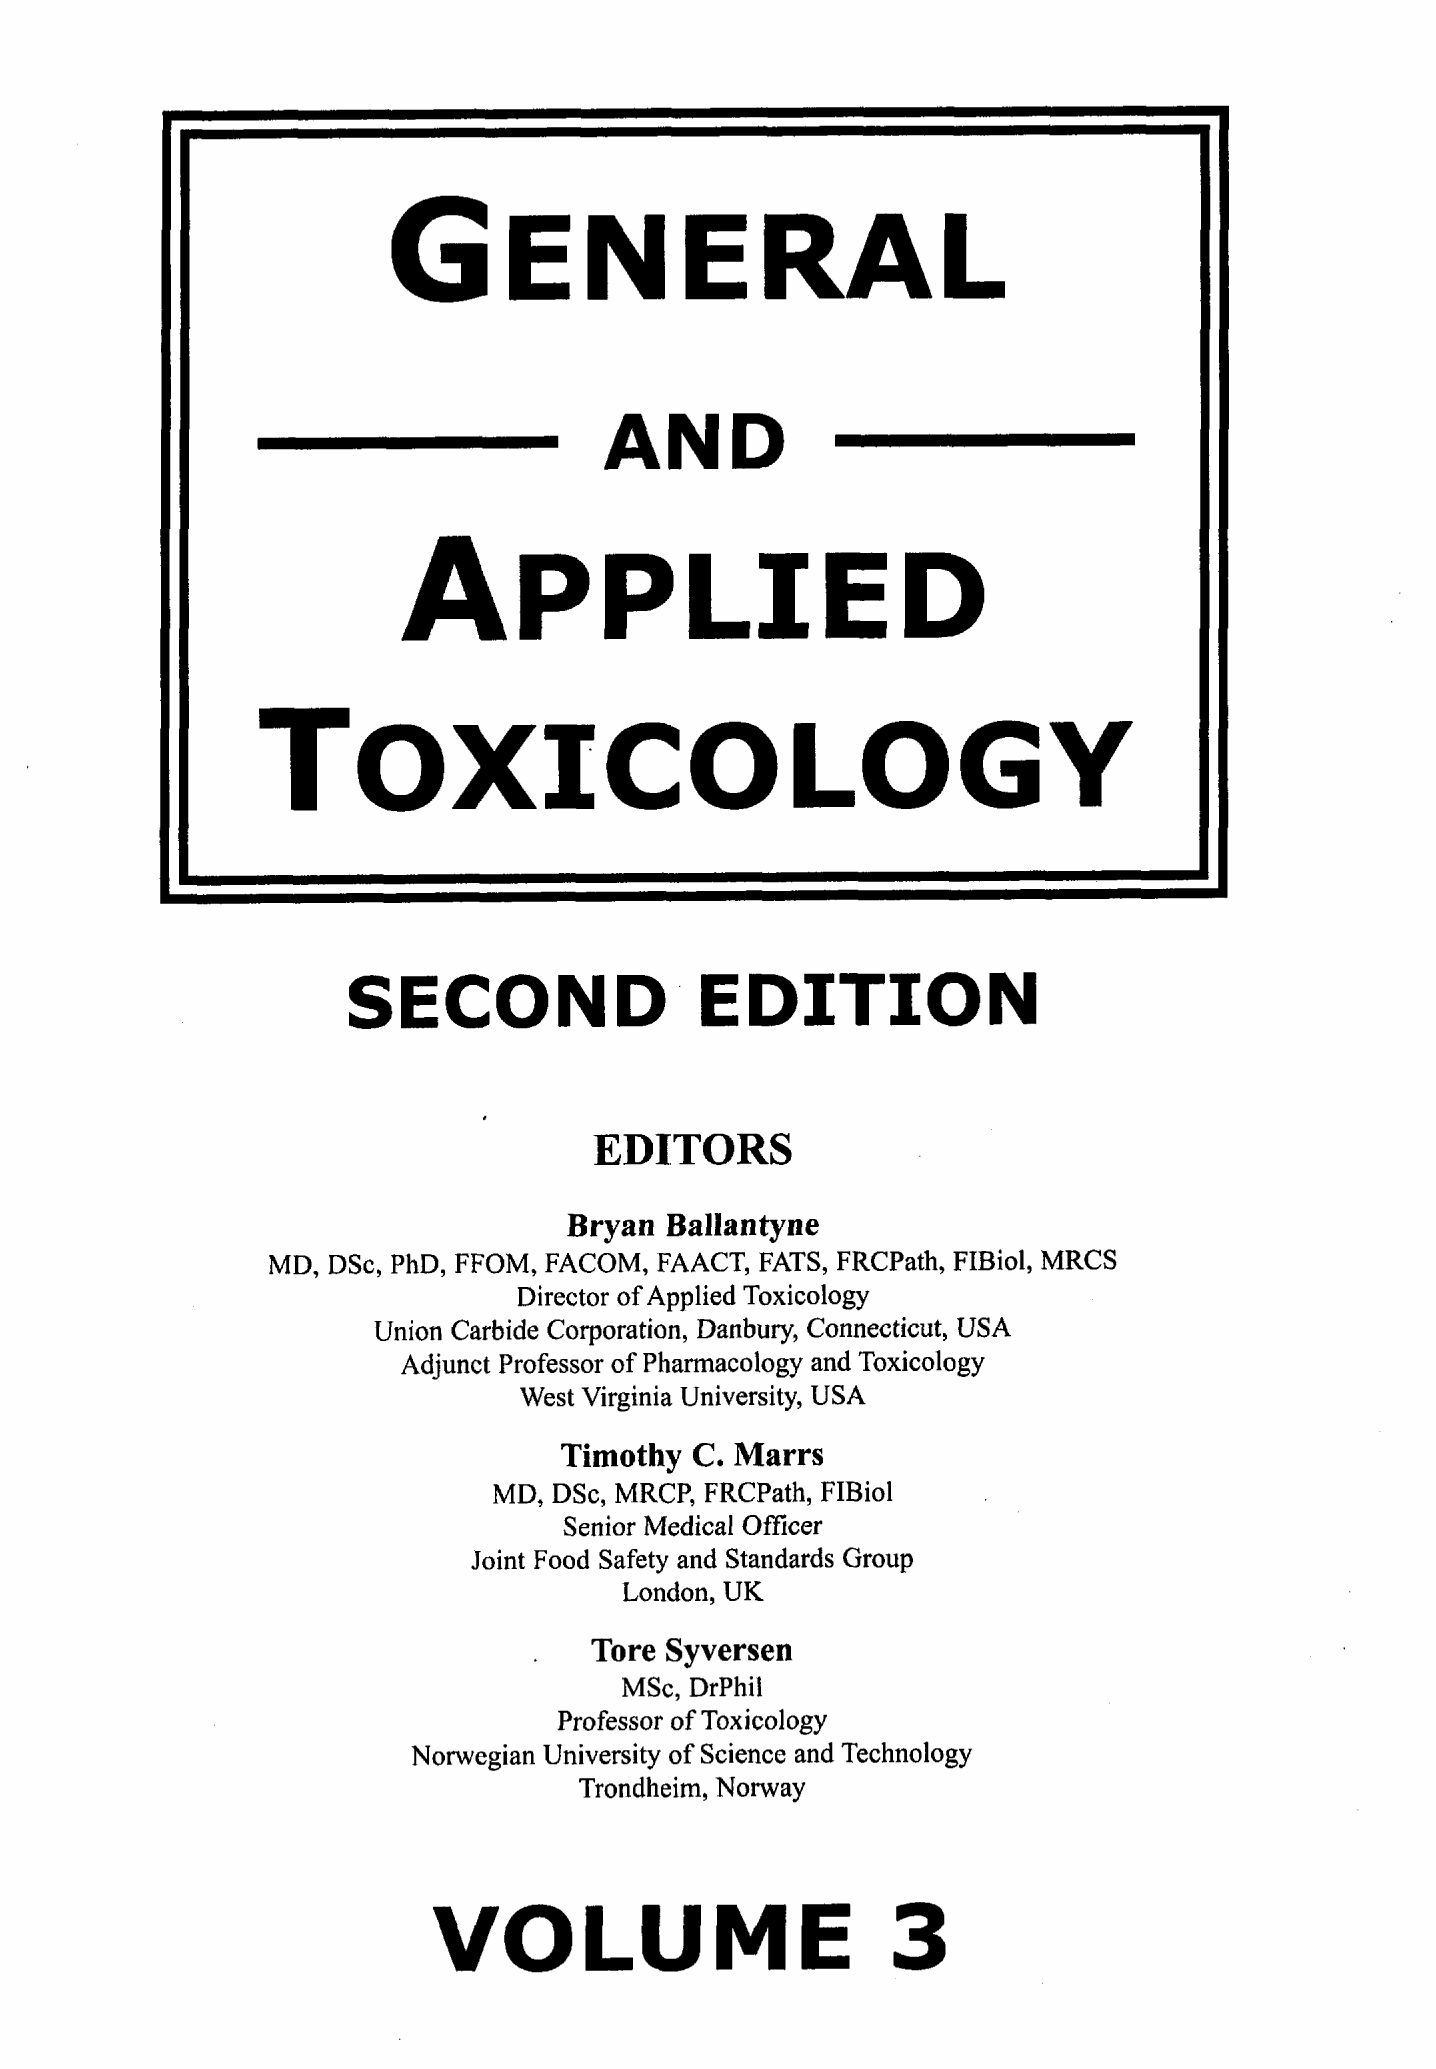 Ballantyne, Bryan, Timothy C. Marrs, and Tore Syversen, eds., General and Applied Toxicology, 2nd ed., vol. 3. London: MacMillian, 1995, p. 1995.